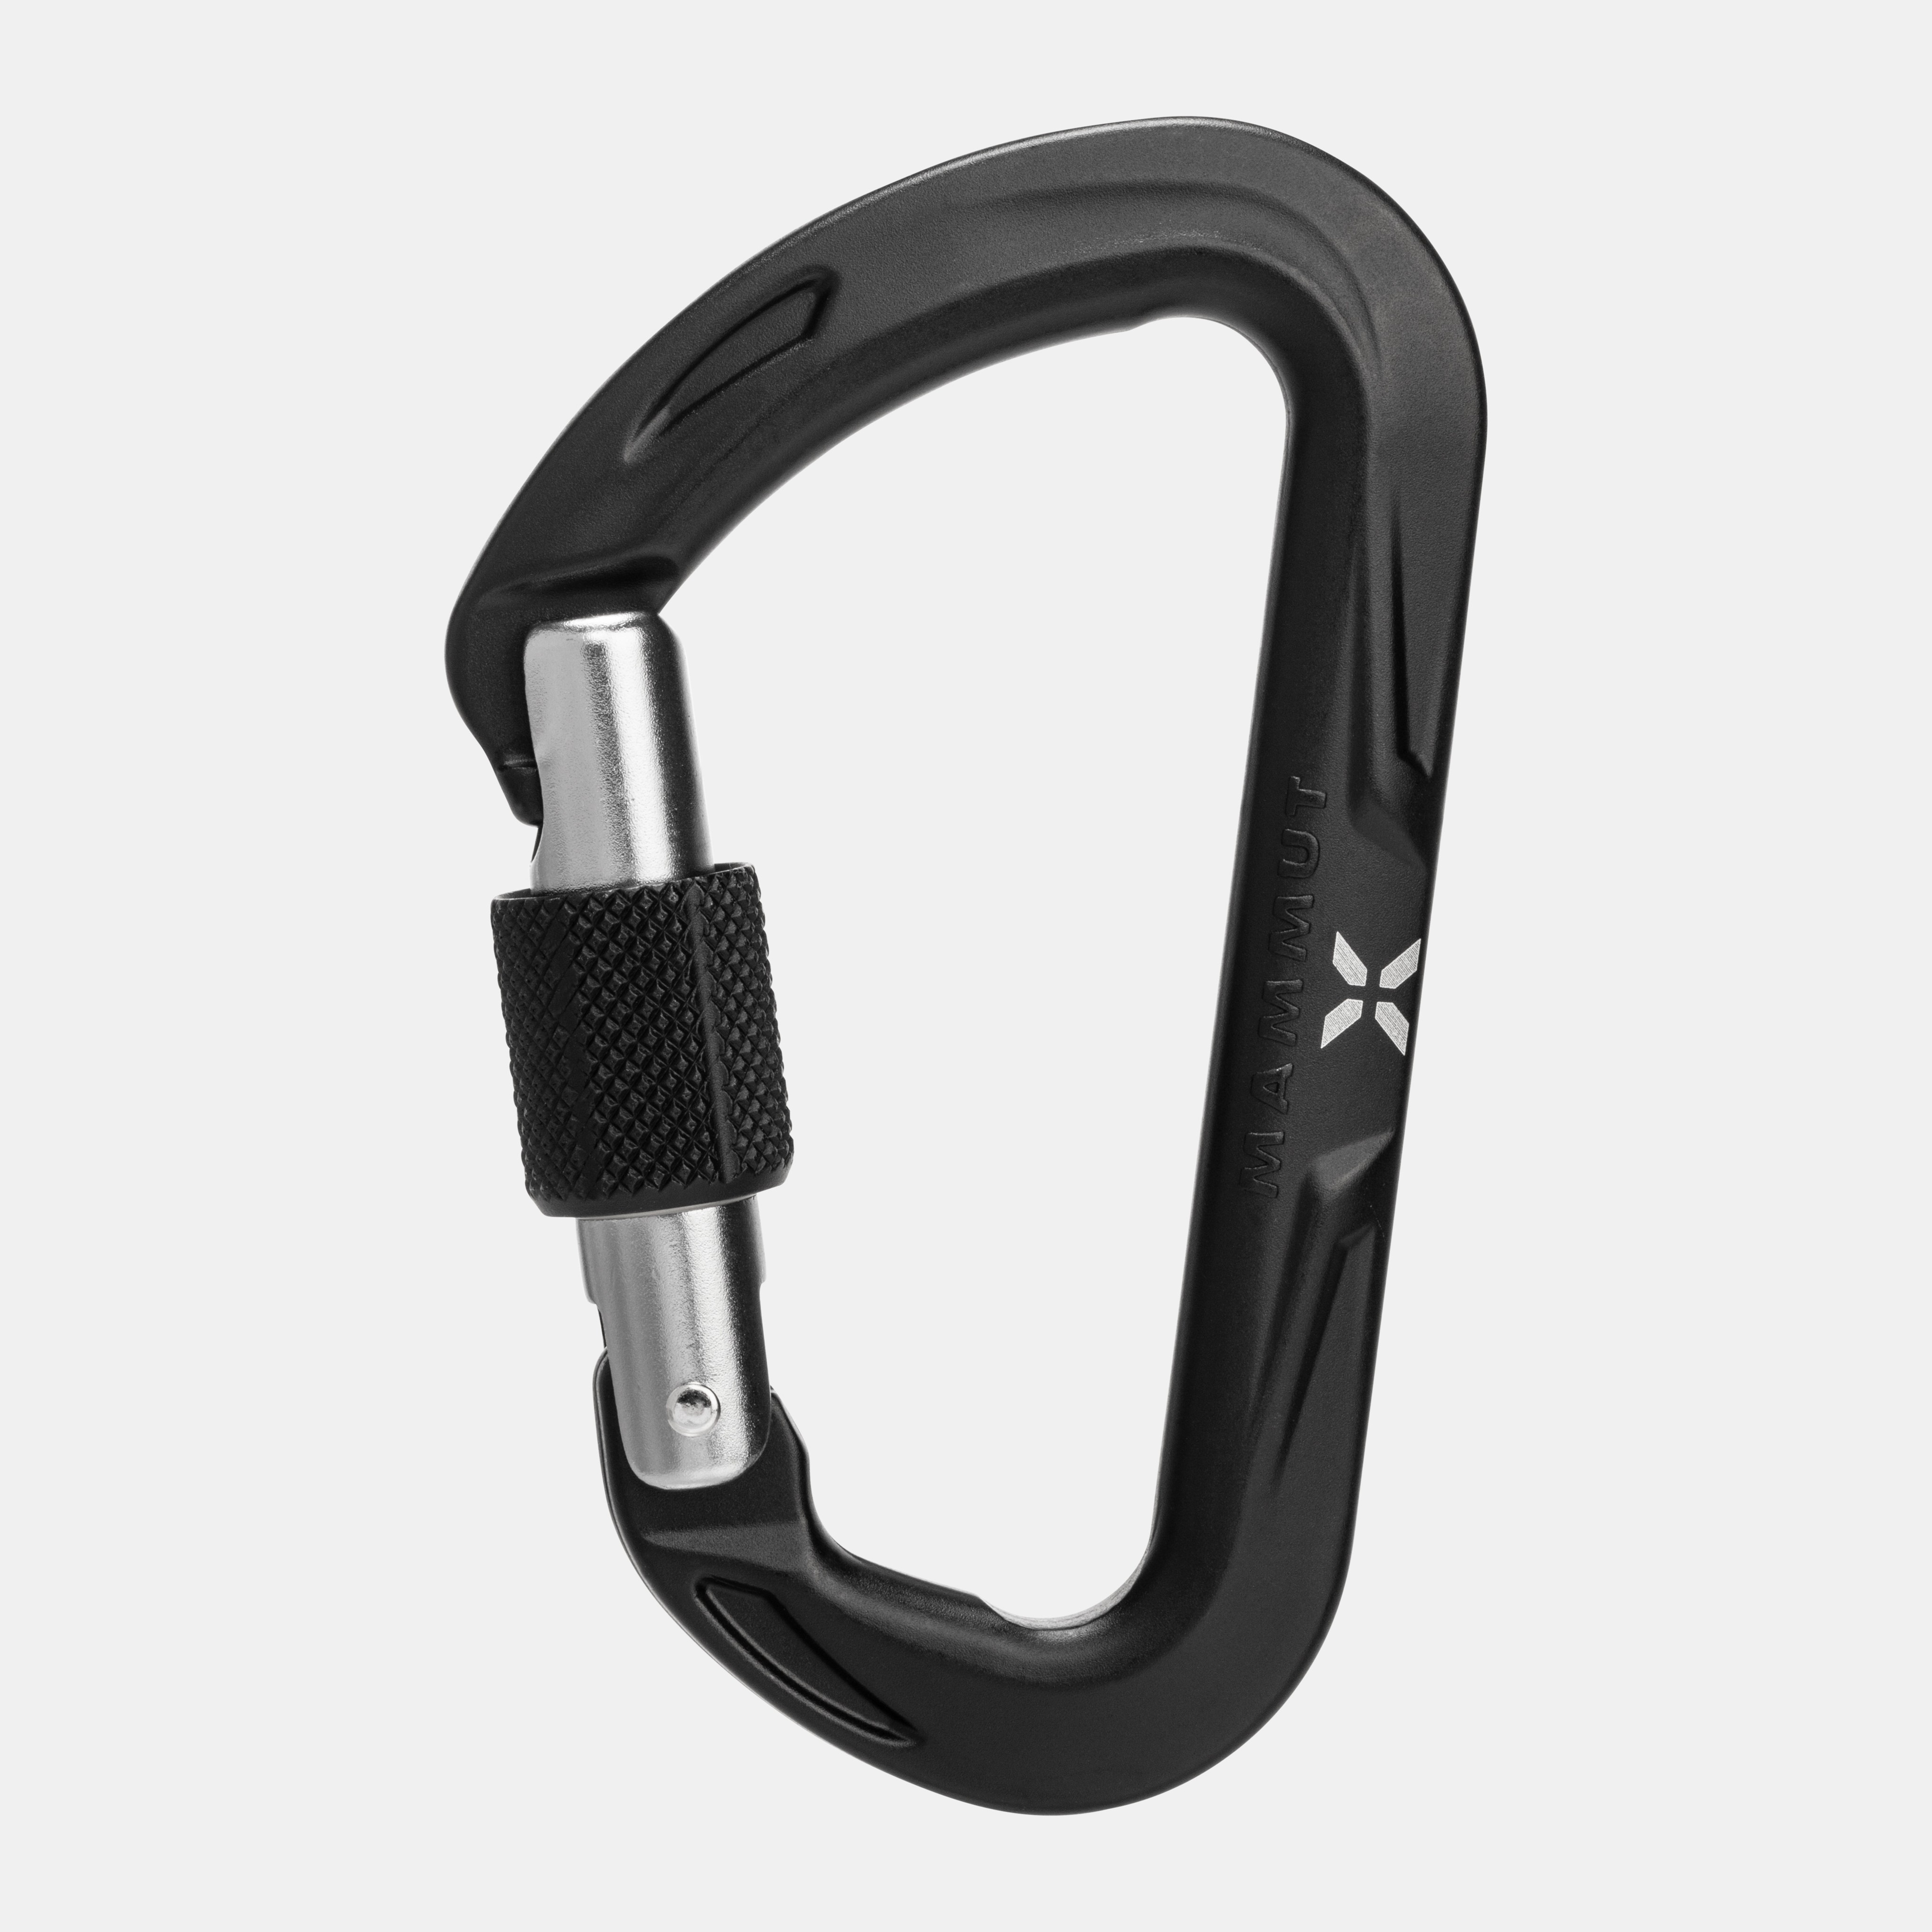 Nordwand Micro Lock Carabiner product image